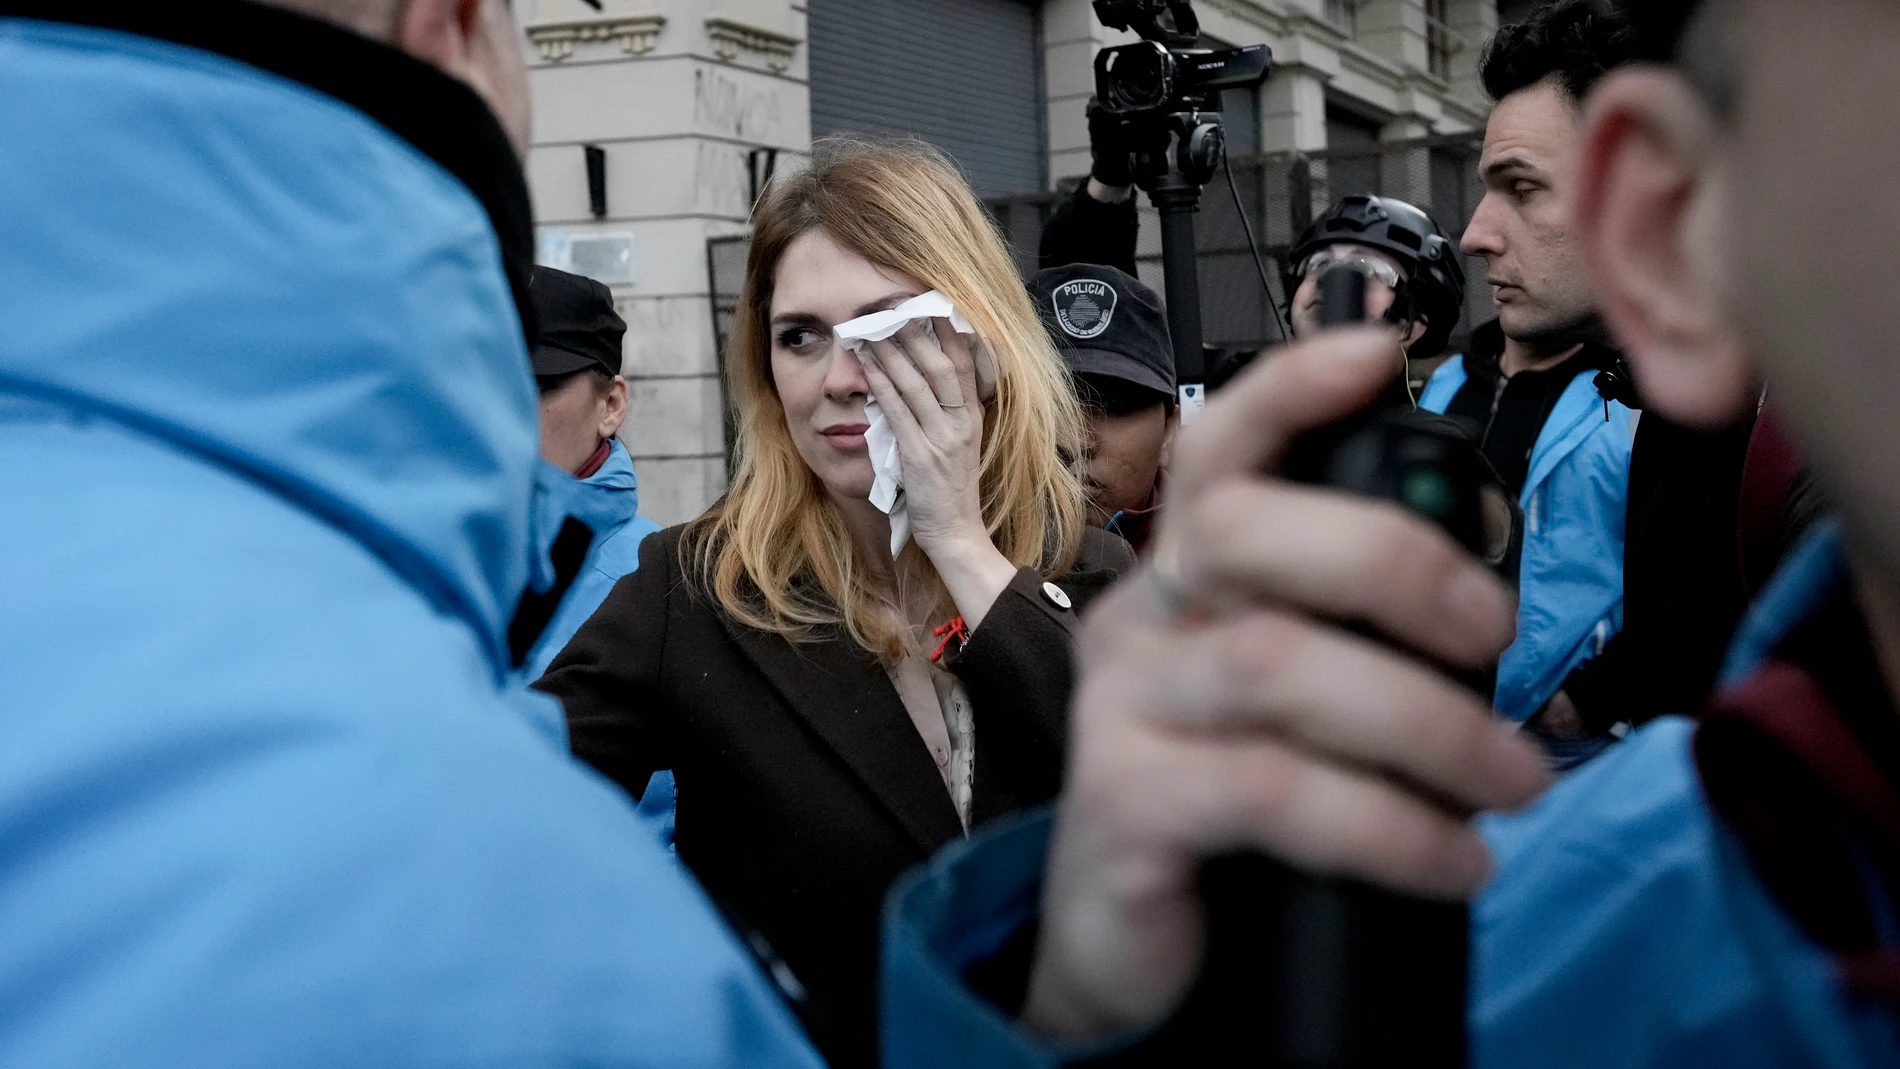 LIlia Lemoine, a candidate for Argentina's lower house of Congress for the Liberty Advances party led by Javier Milei, covers her eye after an alleged attack by protesters outside the Buenos Aires City Legislature in Buenos Aires, Argentina, Monday, Sept. 4, 2023. Demonstrators protested an event organized by Milei's running mate Victoria Villarruel to honor victims of armed 1970's leftist groups. (AP Photo/Rodrigo Abd)